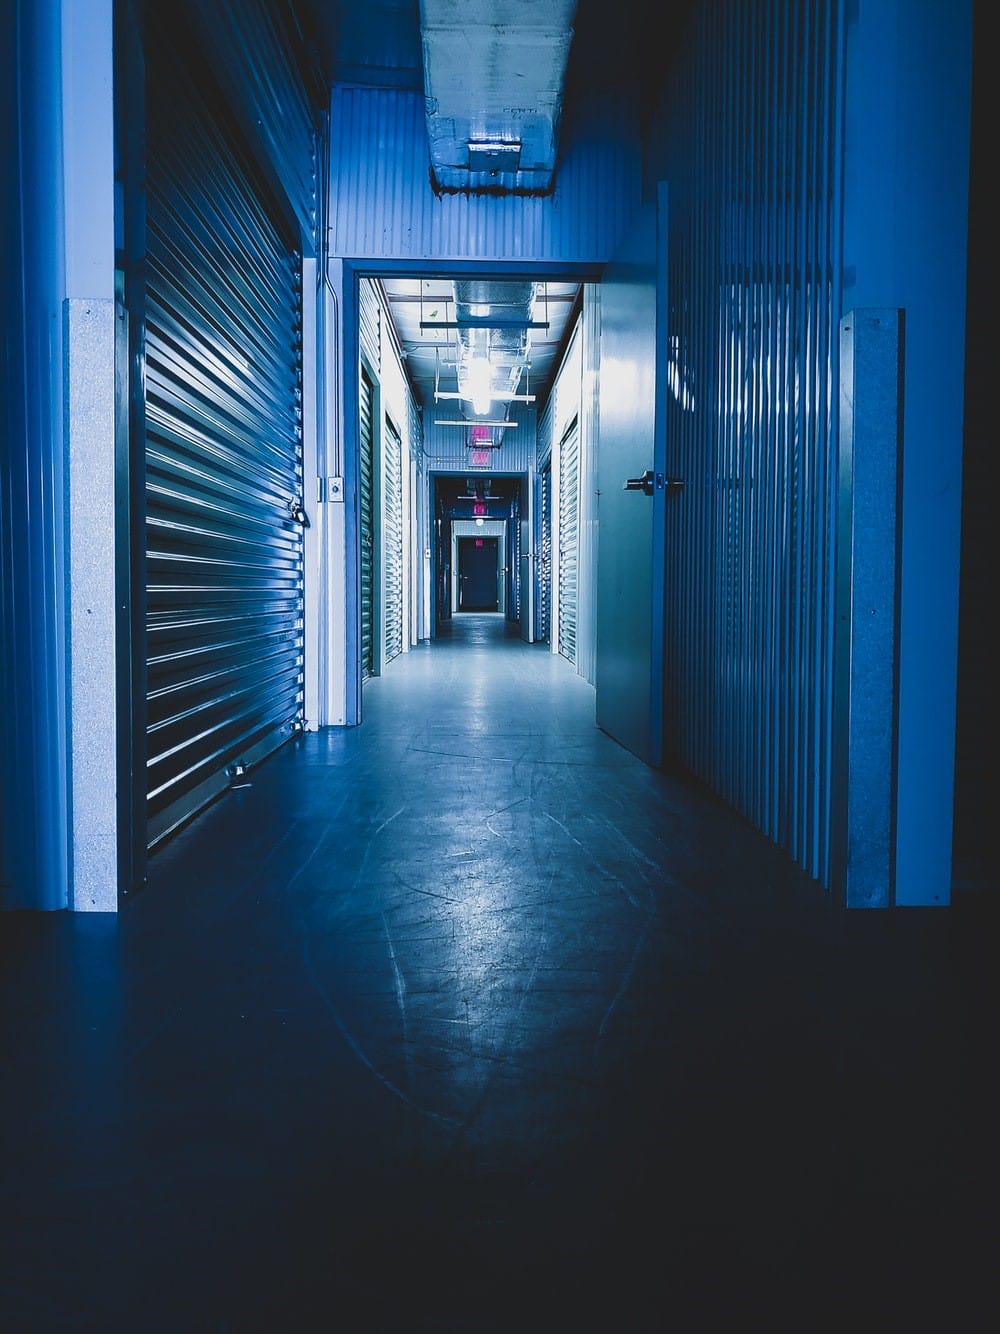 Things to Consider Before Renting a Storage Facility